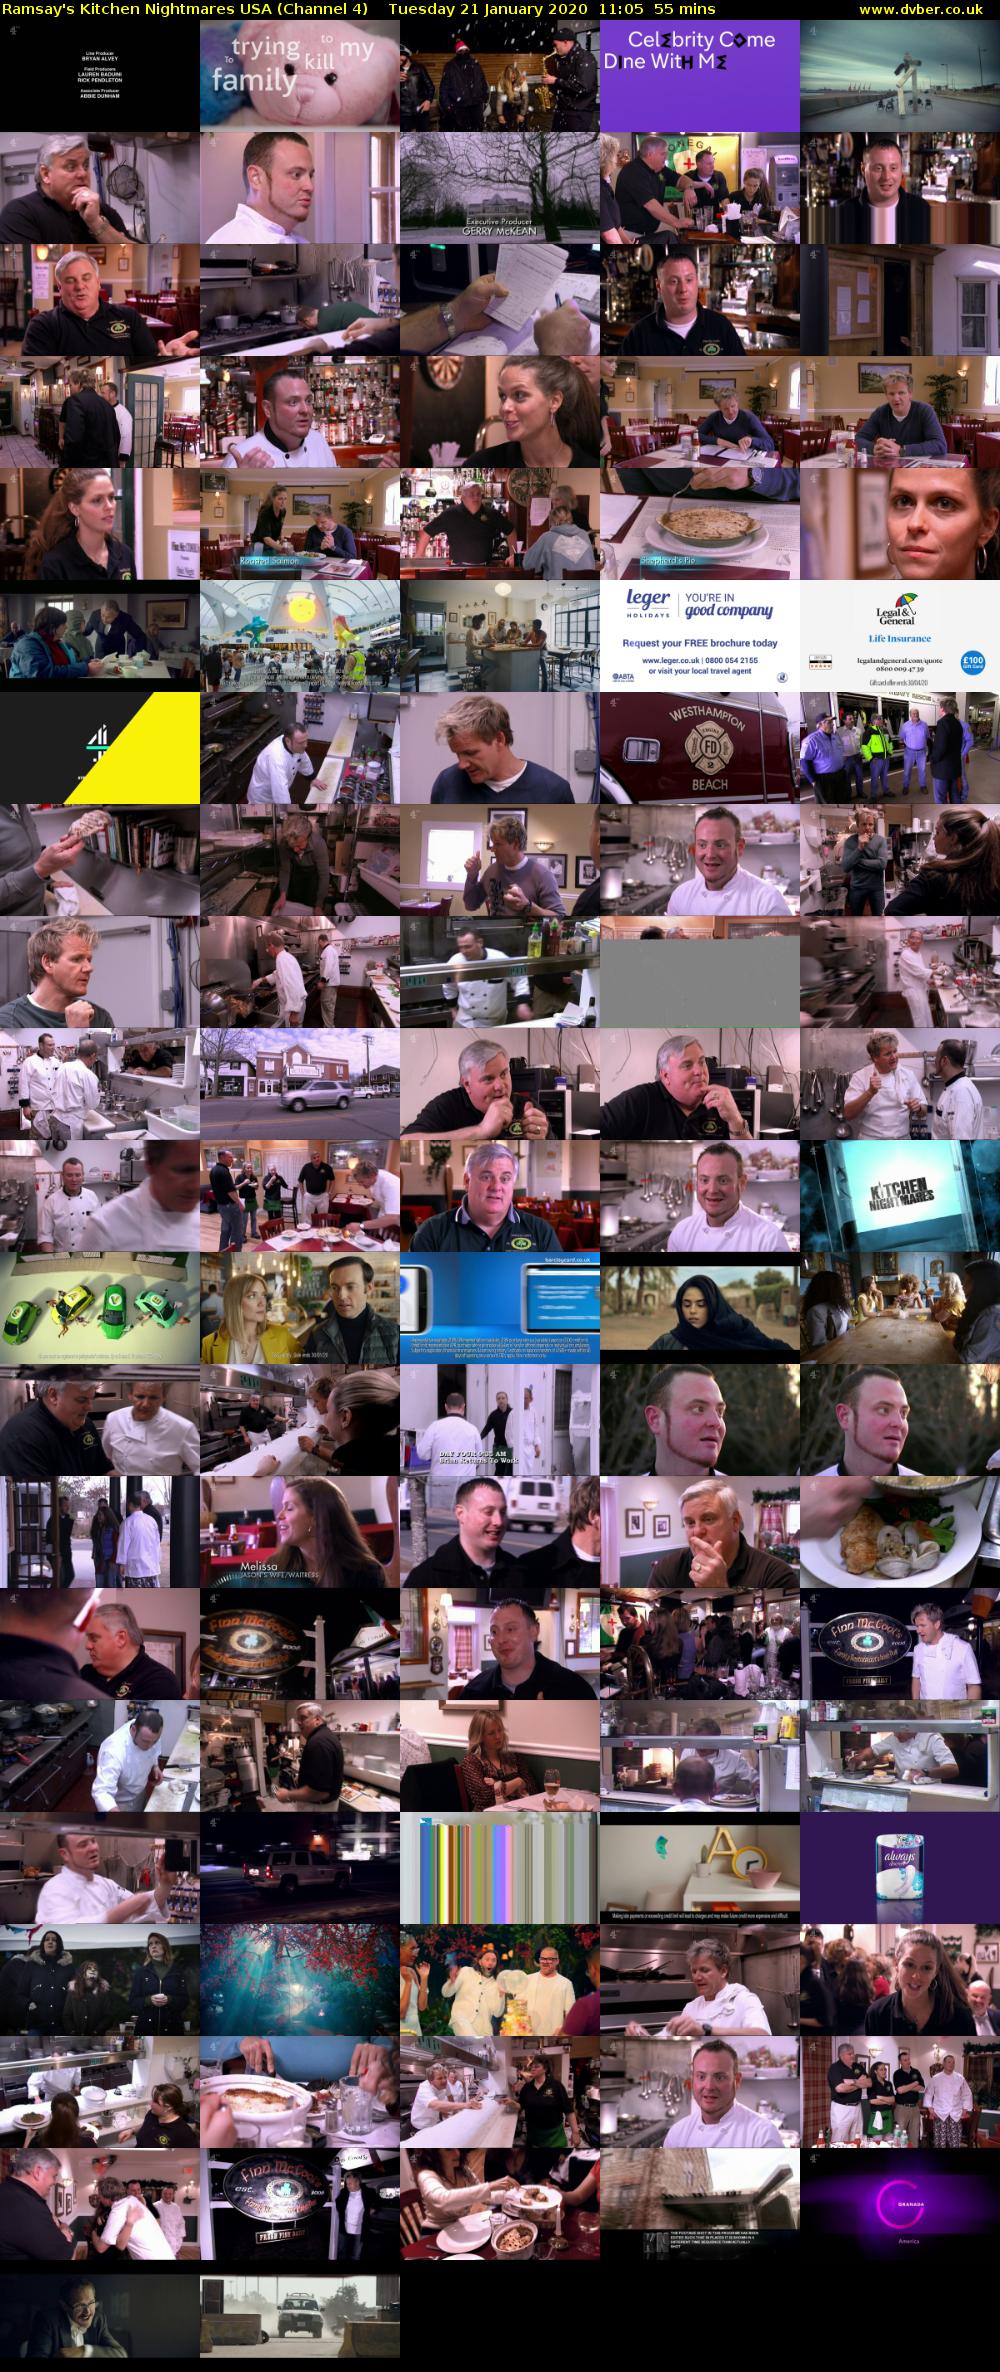 Ramsay's Kitchen Nightmares USA (Channel 4) Tuesday 21 January 2020 11:05 - 12:00